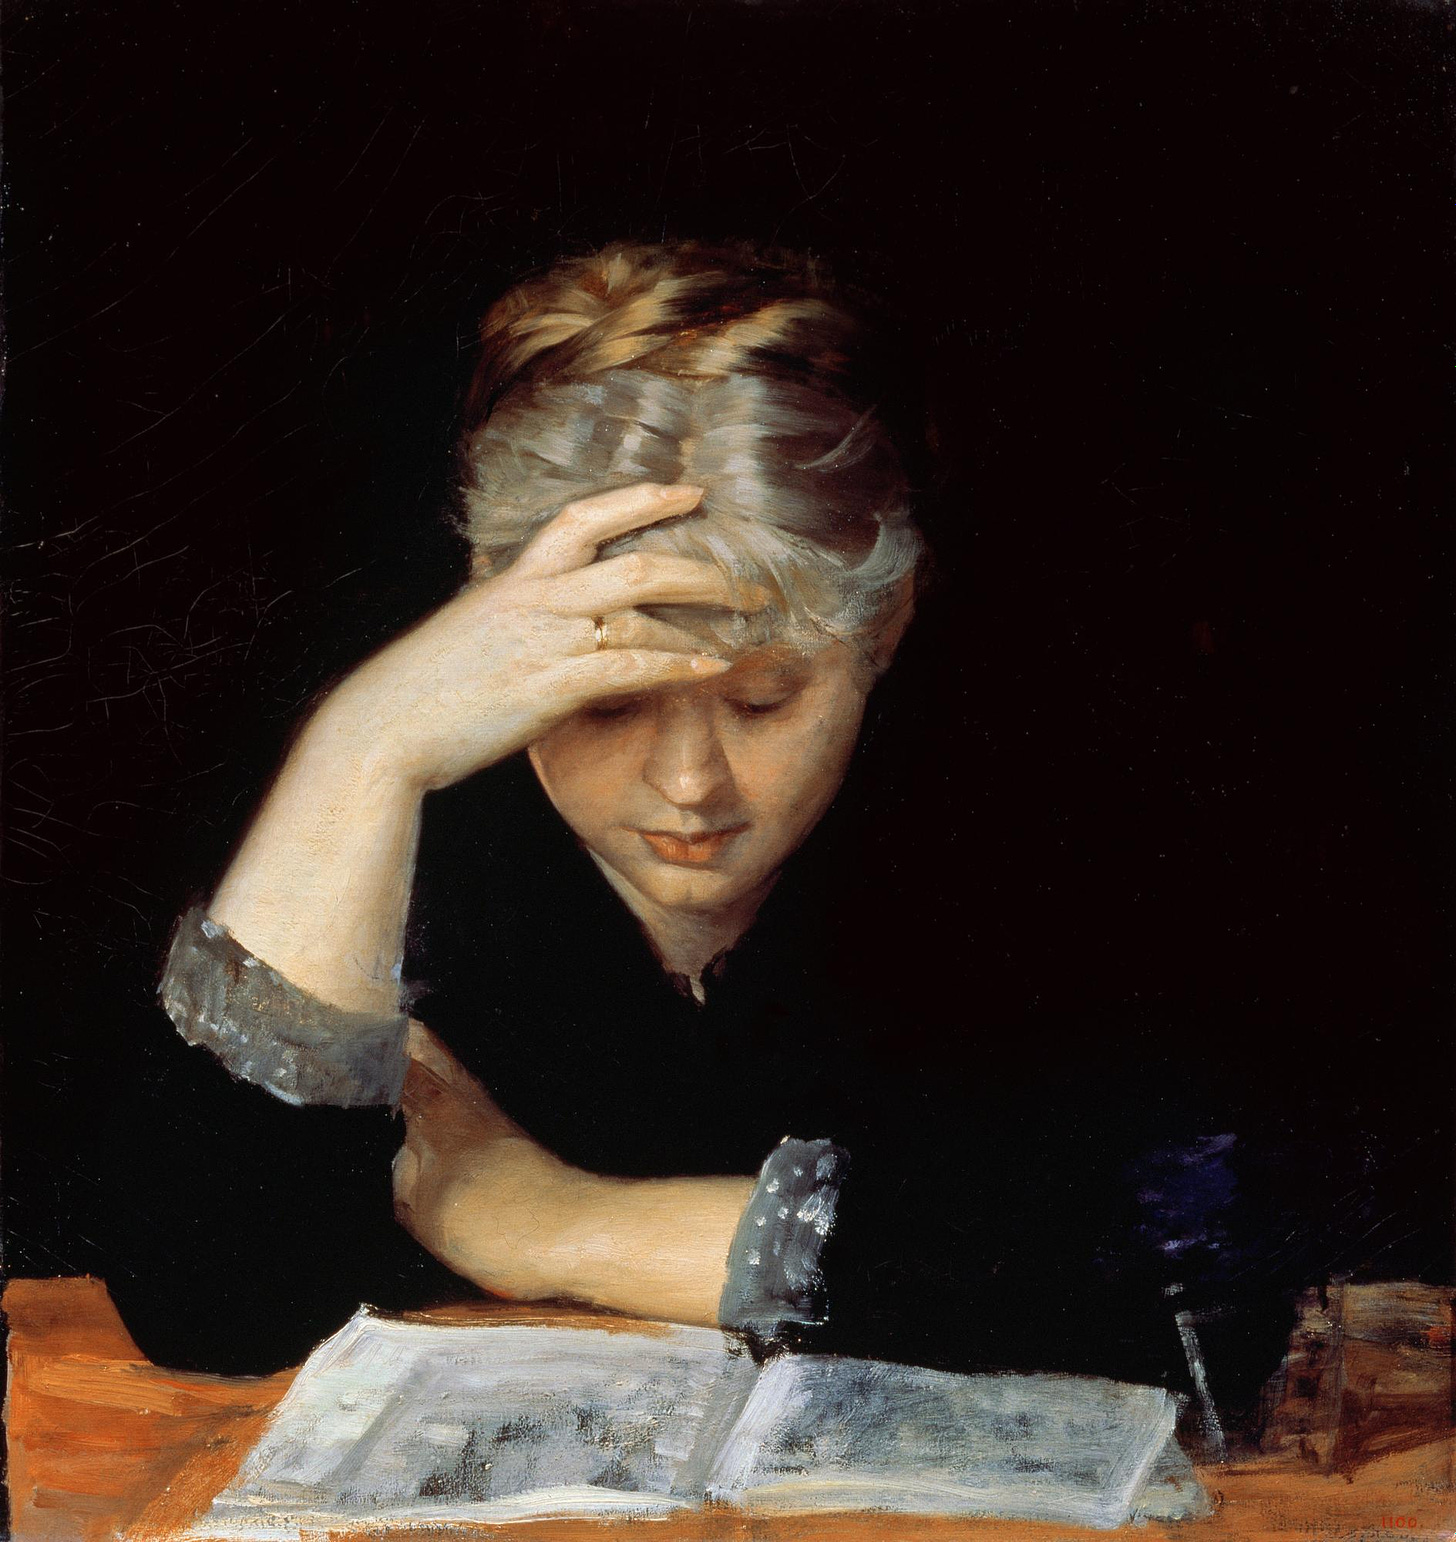 A woman bends over an open book, absorbed.